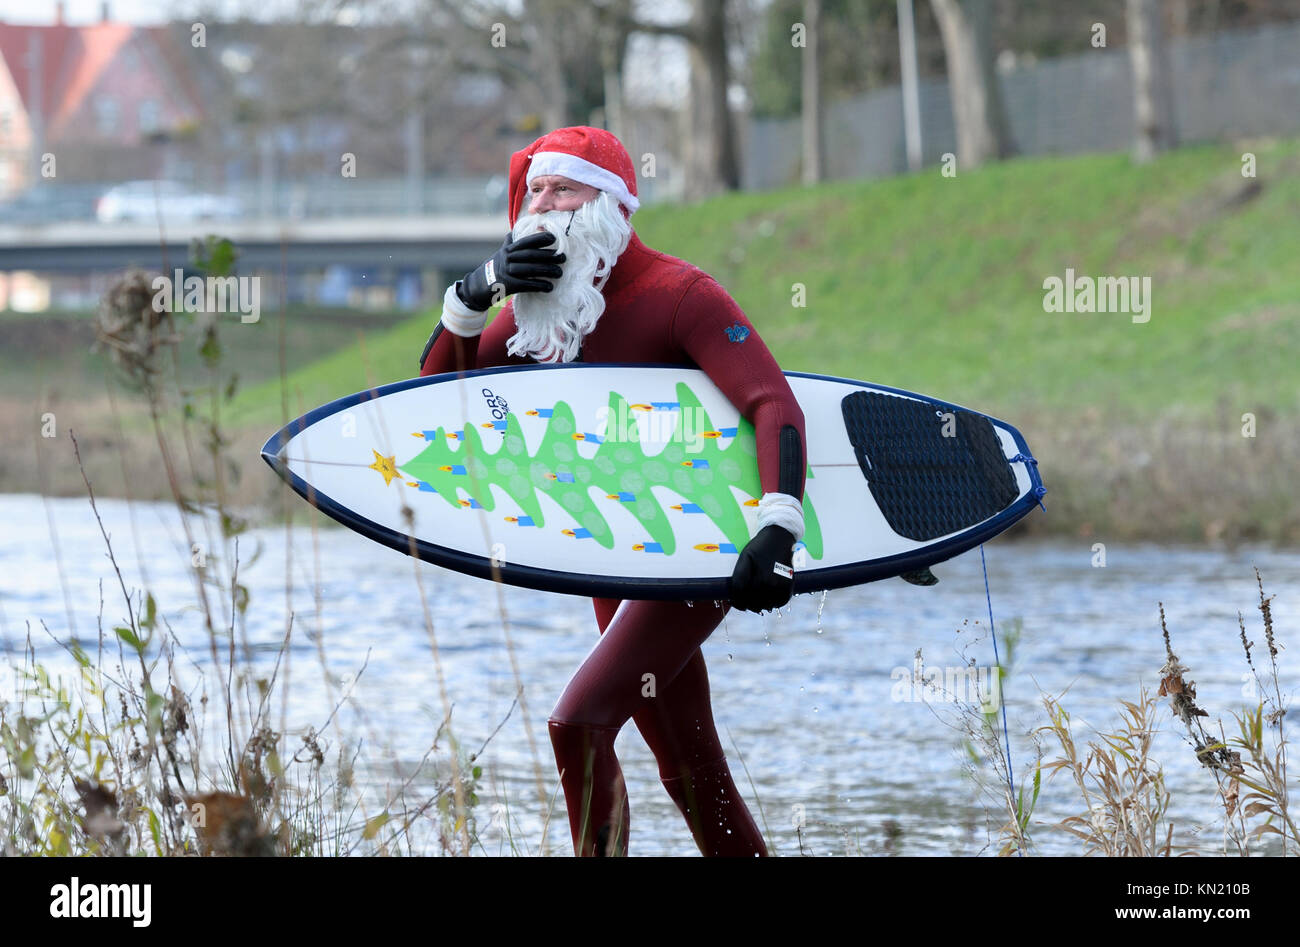 Rastatt, Germany. 09th Dec, 2017. The cold temperatures could not restrain Surfer Thomas Schmidt (50) from Rastatt in Germany going in the Murg-River in Rastatt to engage his passion Surfing. Dressed in a red neoprene Santa Claus suit Credit: dpa picture alliance/Alamy Live News Stock Photo